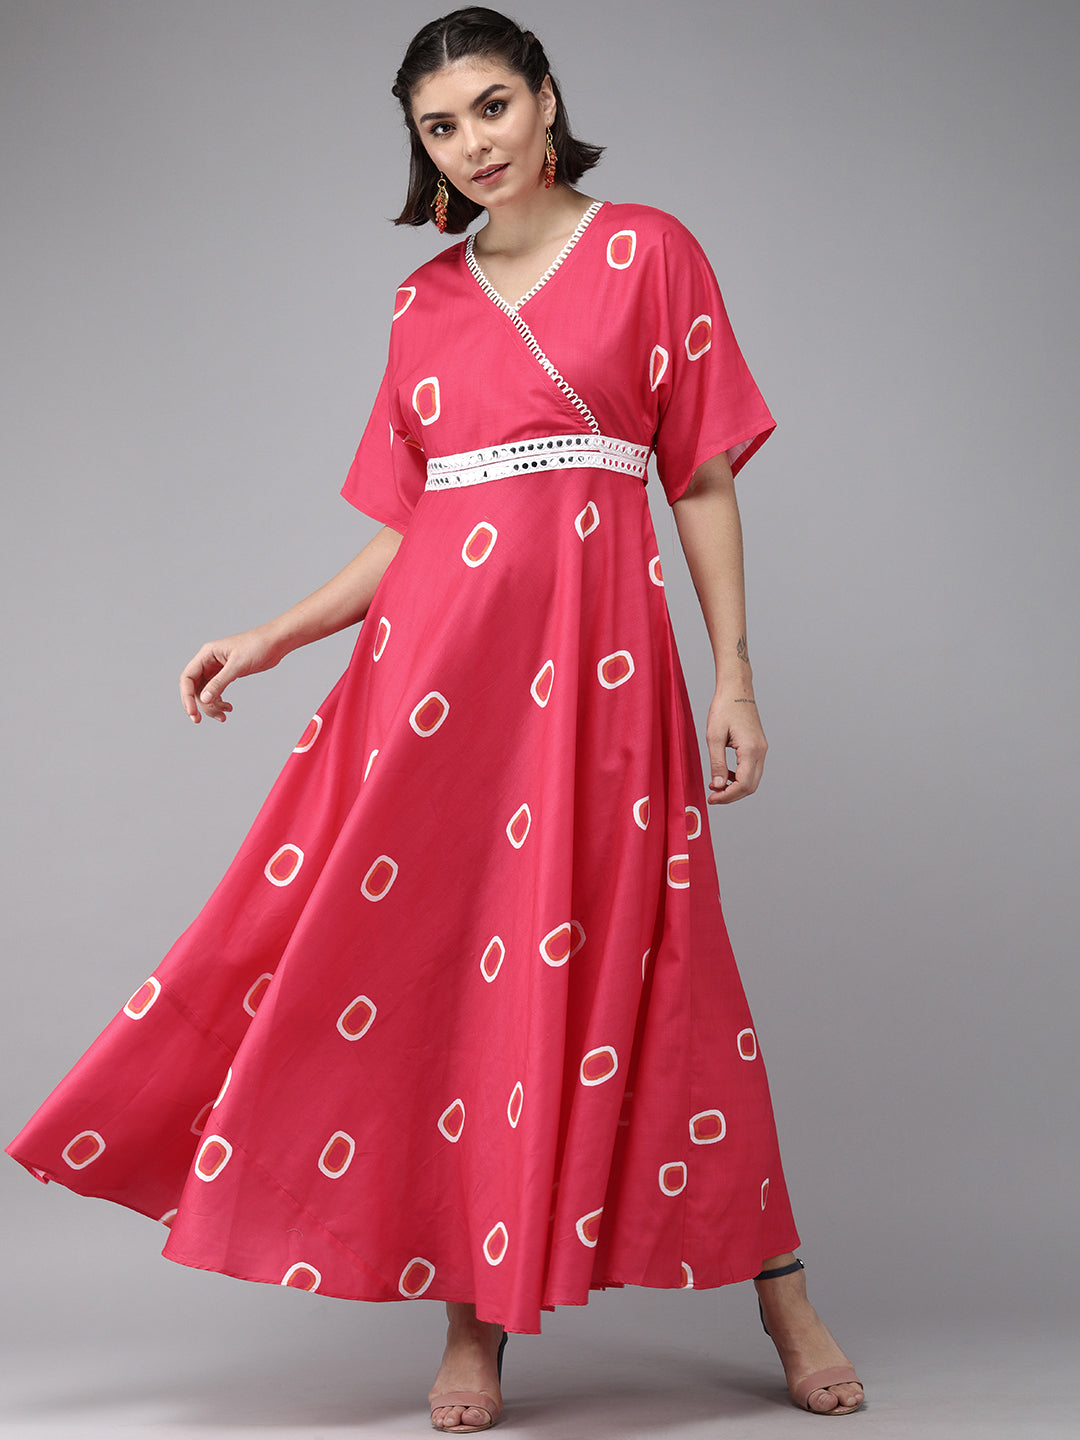 Women's Pink Floral Print Maxi Dress - Bhama Couture